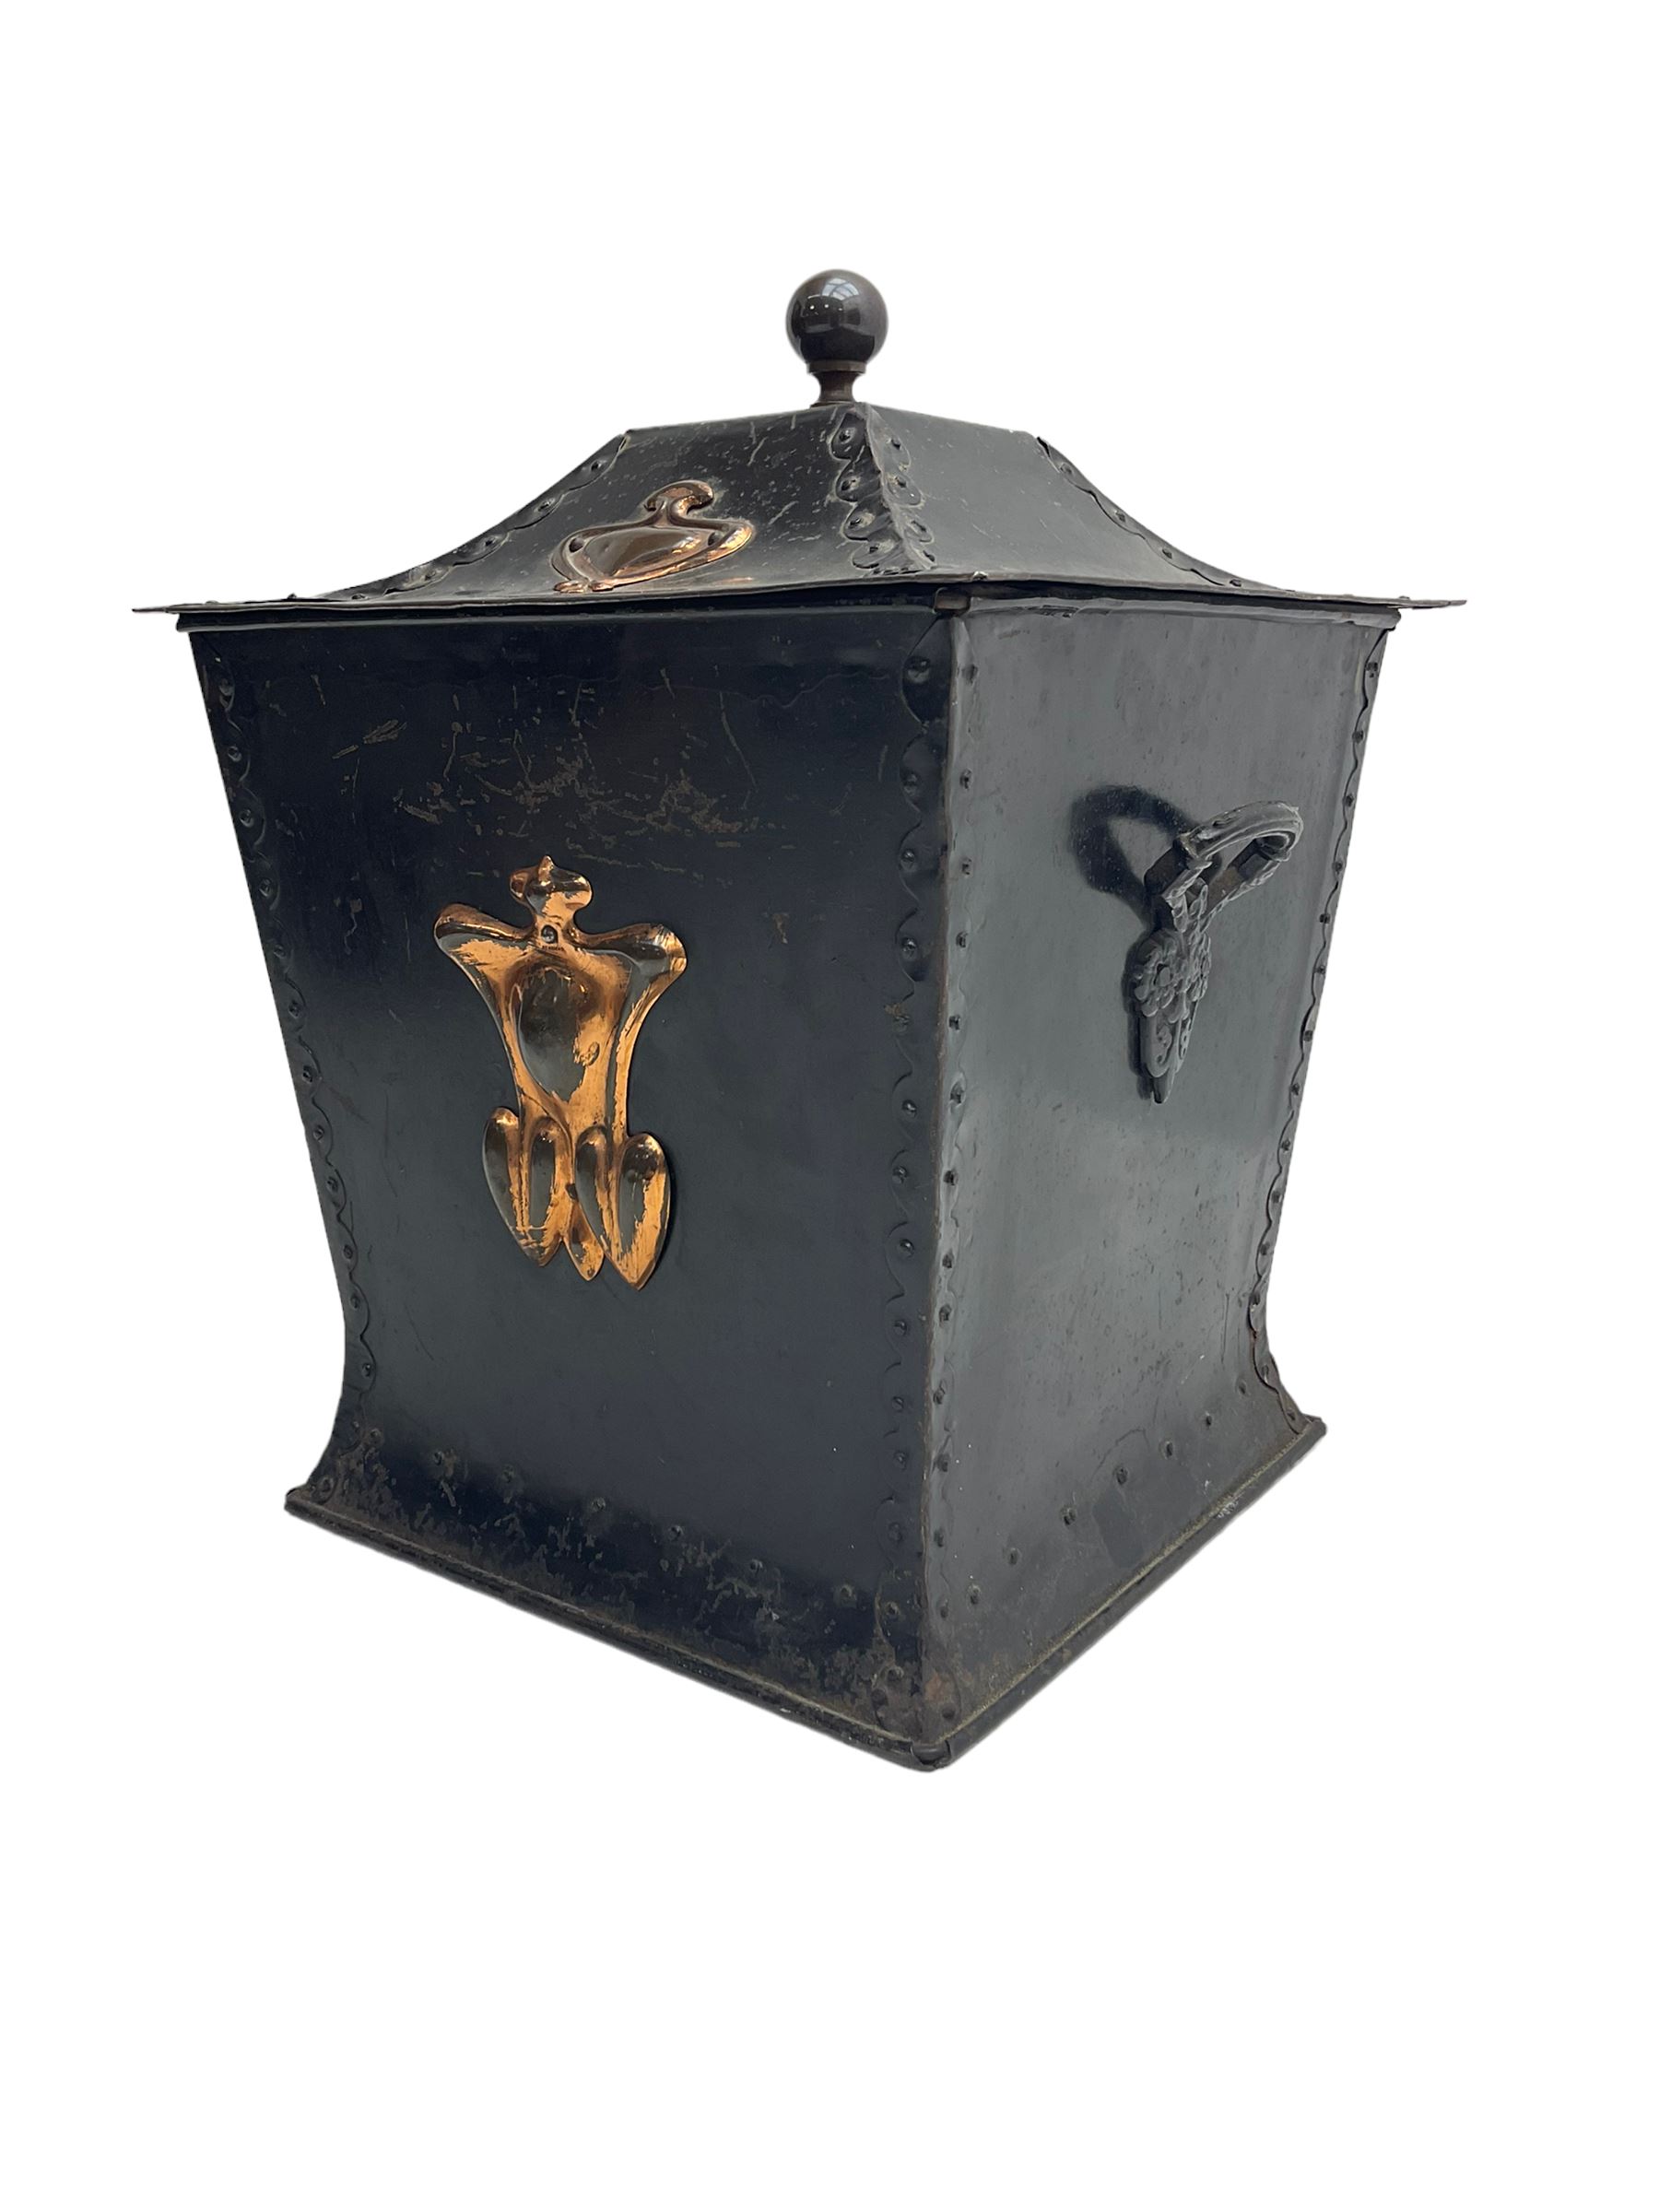 Art Nouveau period metal coal bucket with hinged lid - Image 5 of 9